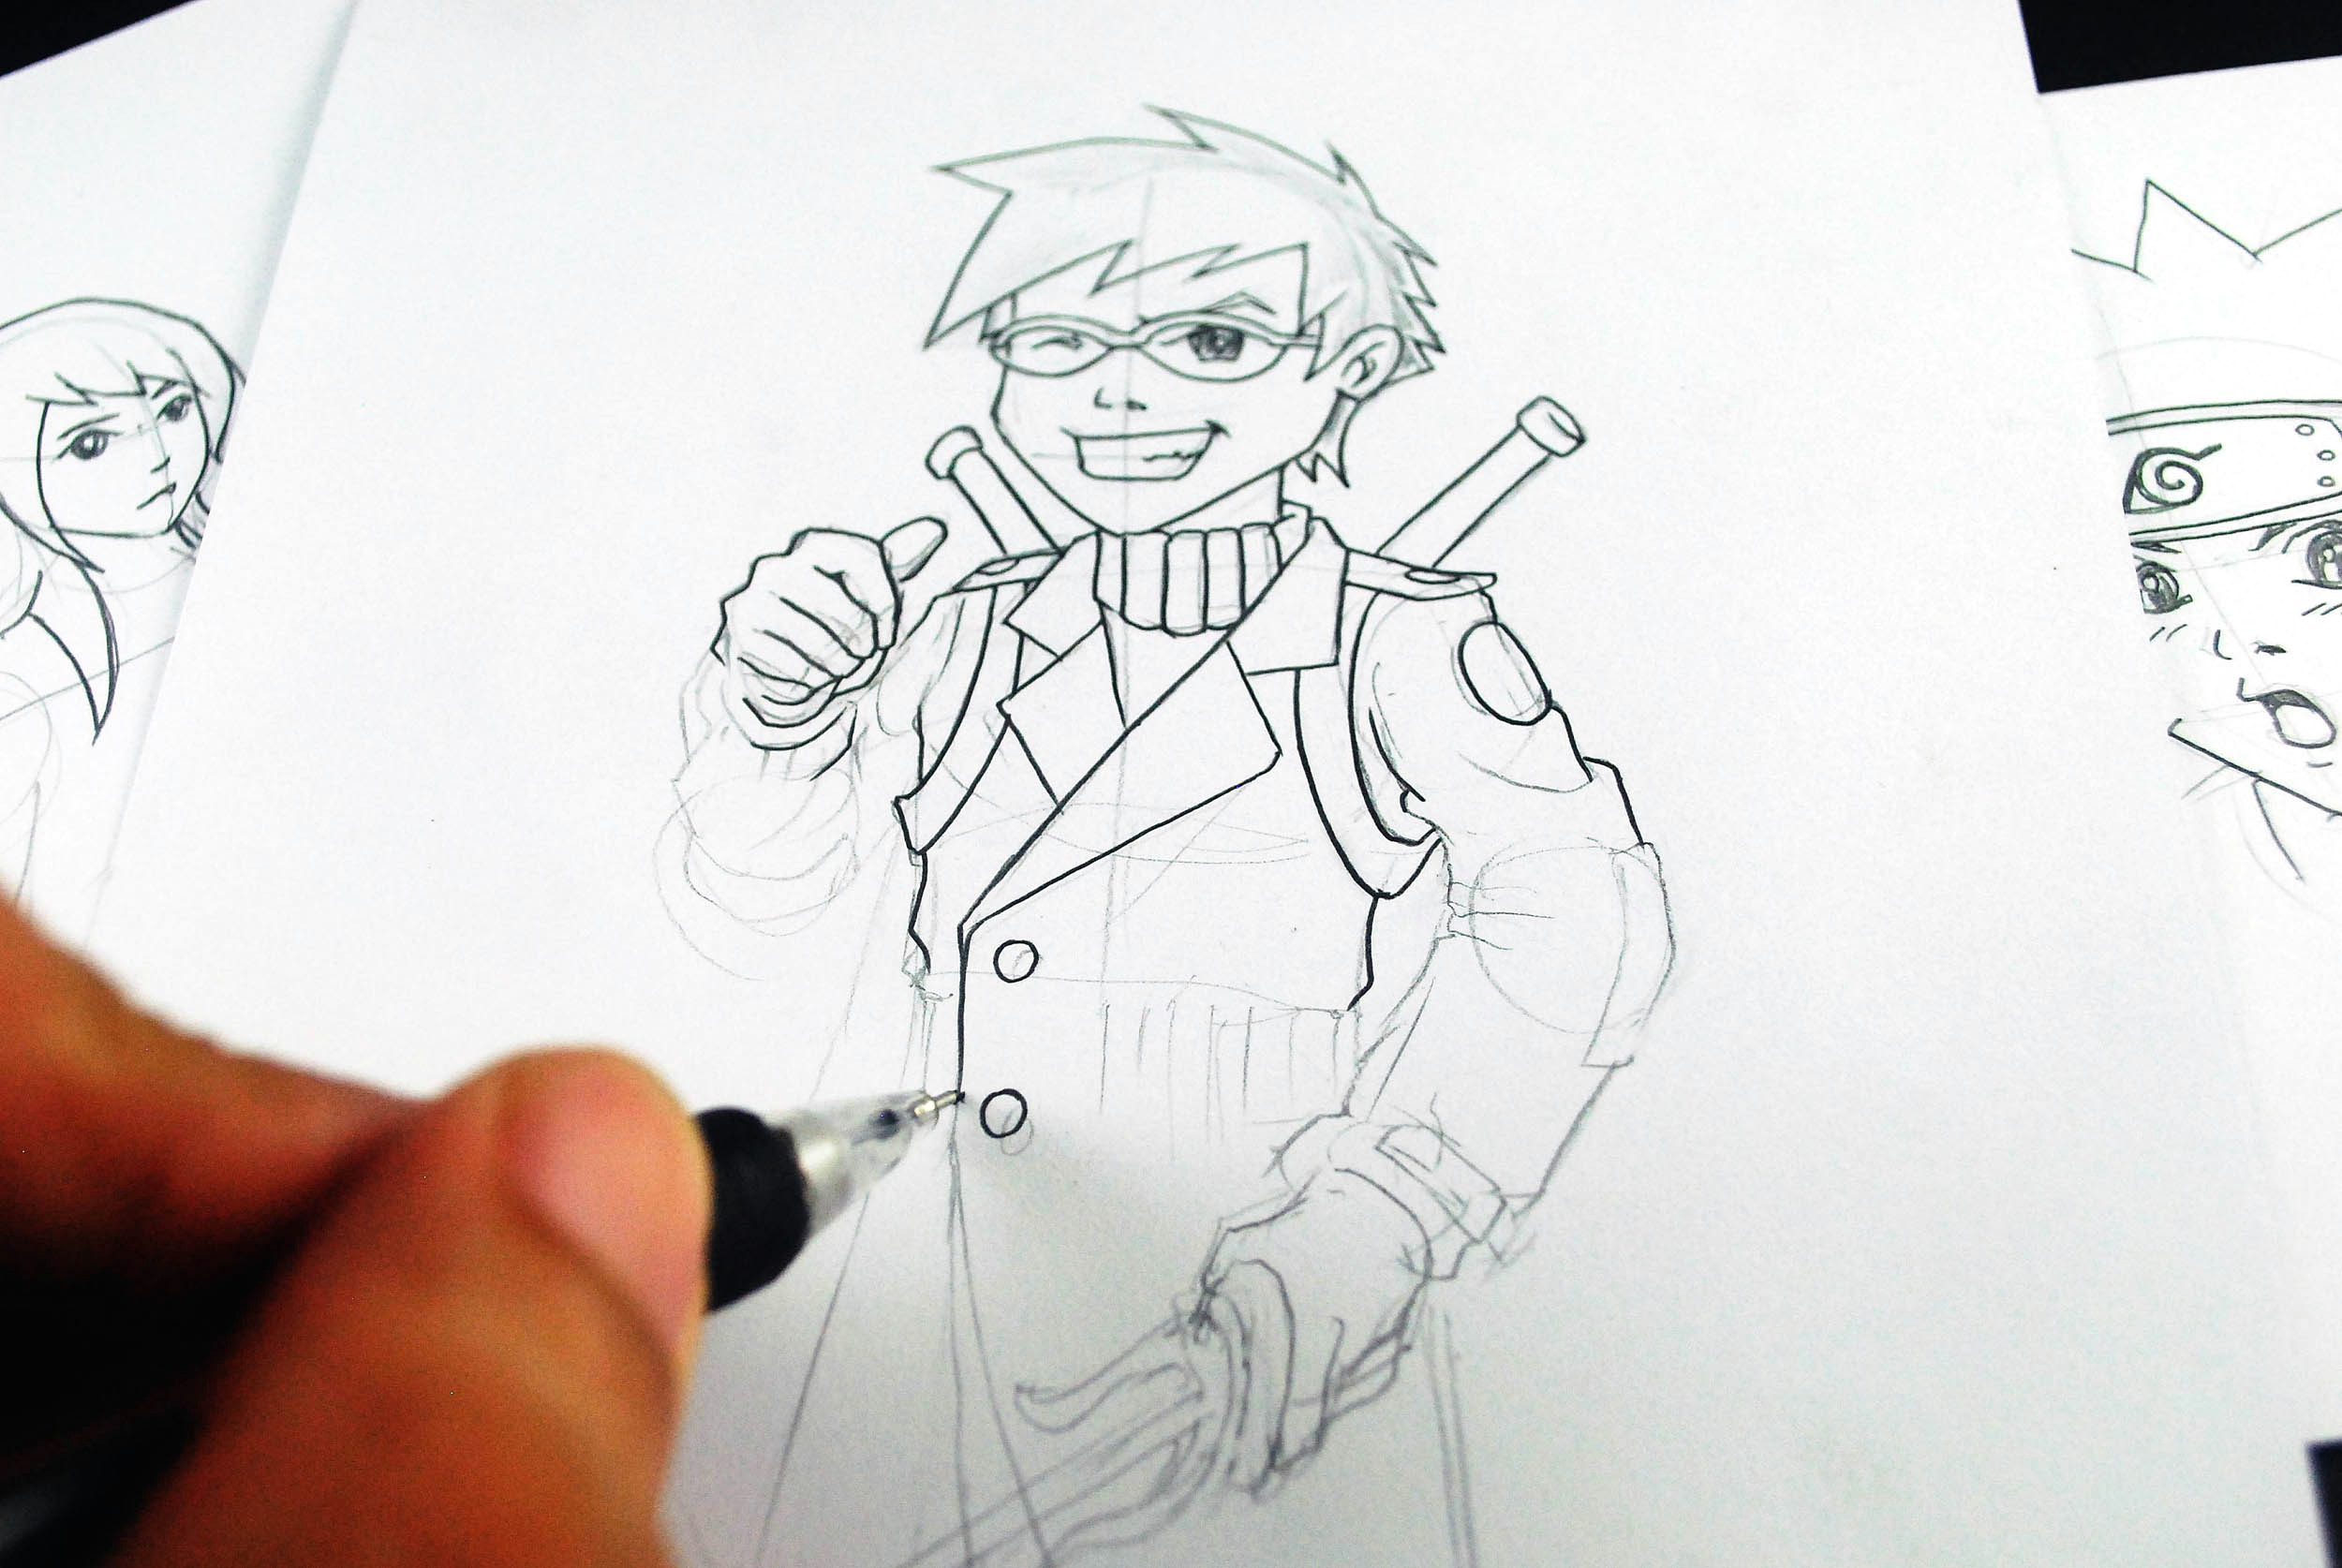 Anime Drawing Yourself How to Learn to Draw Manga and Develop Your Own Style 5 Steps